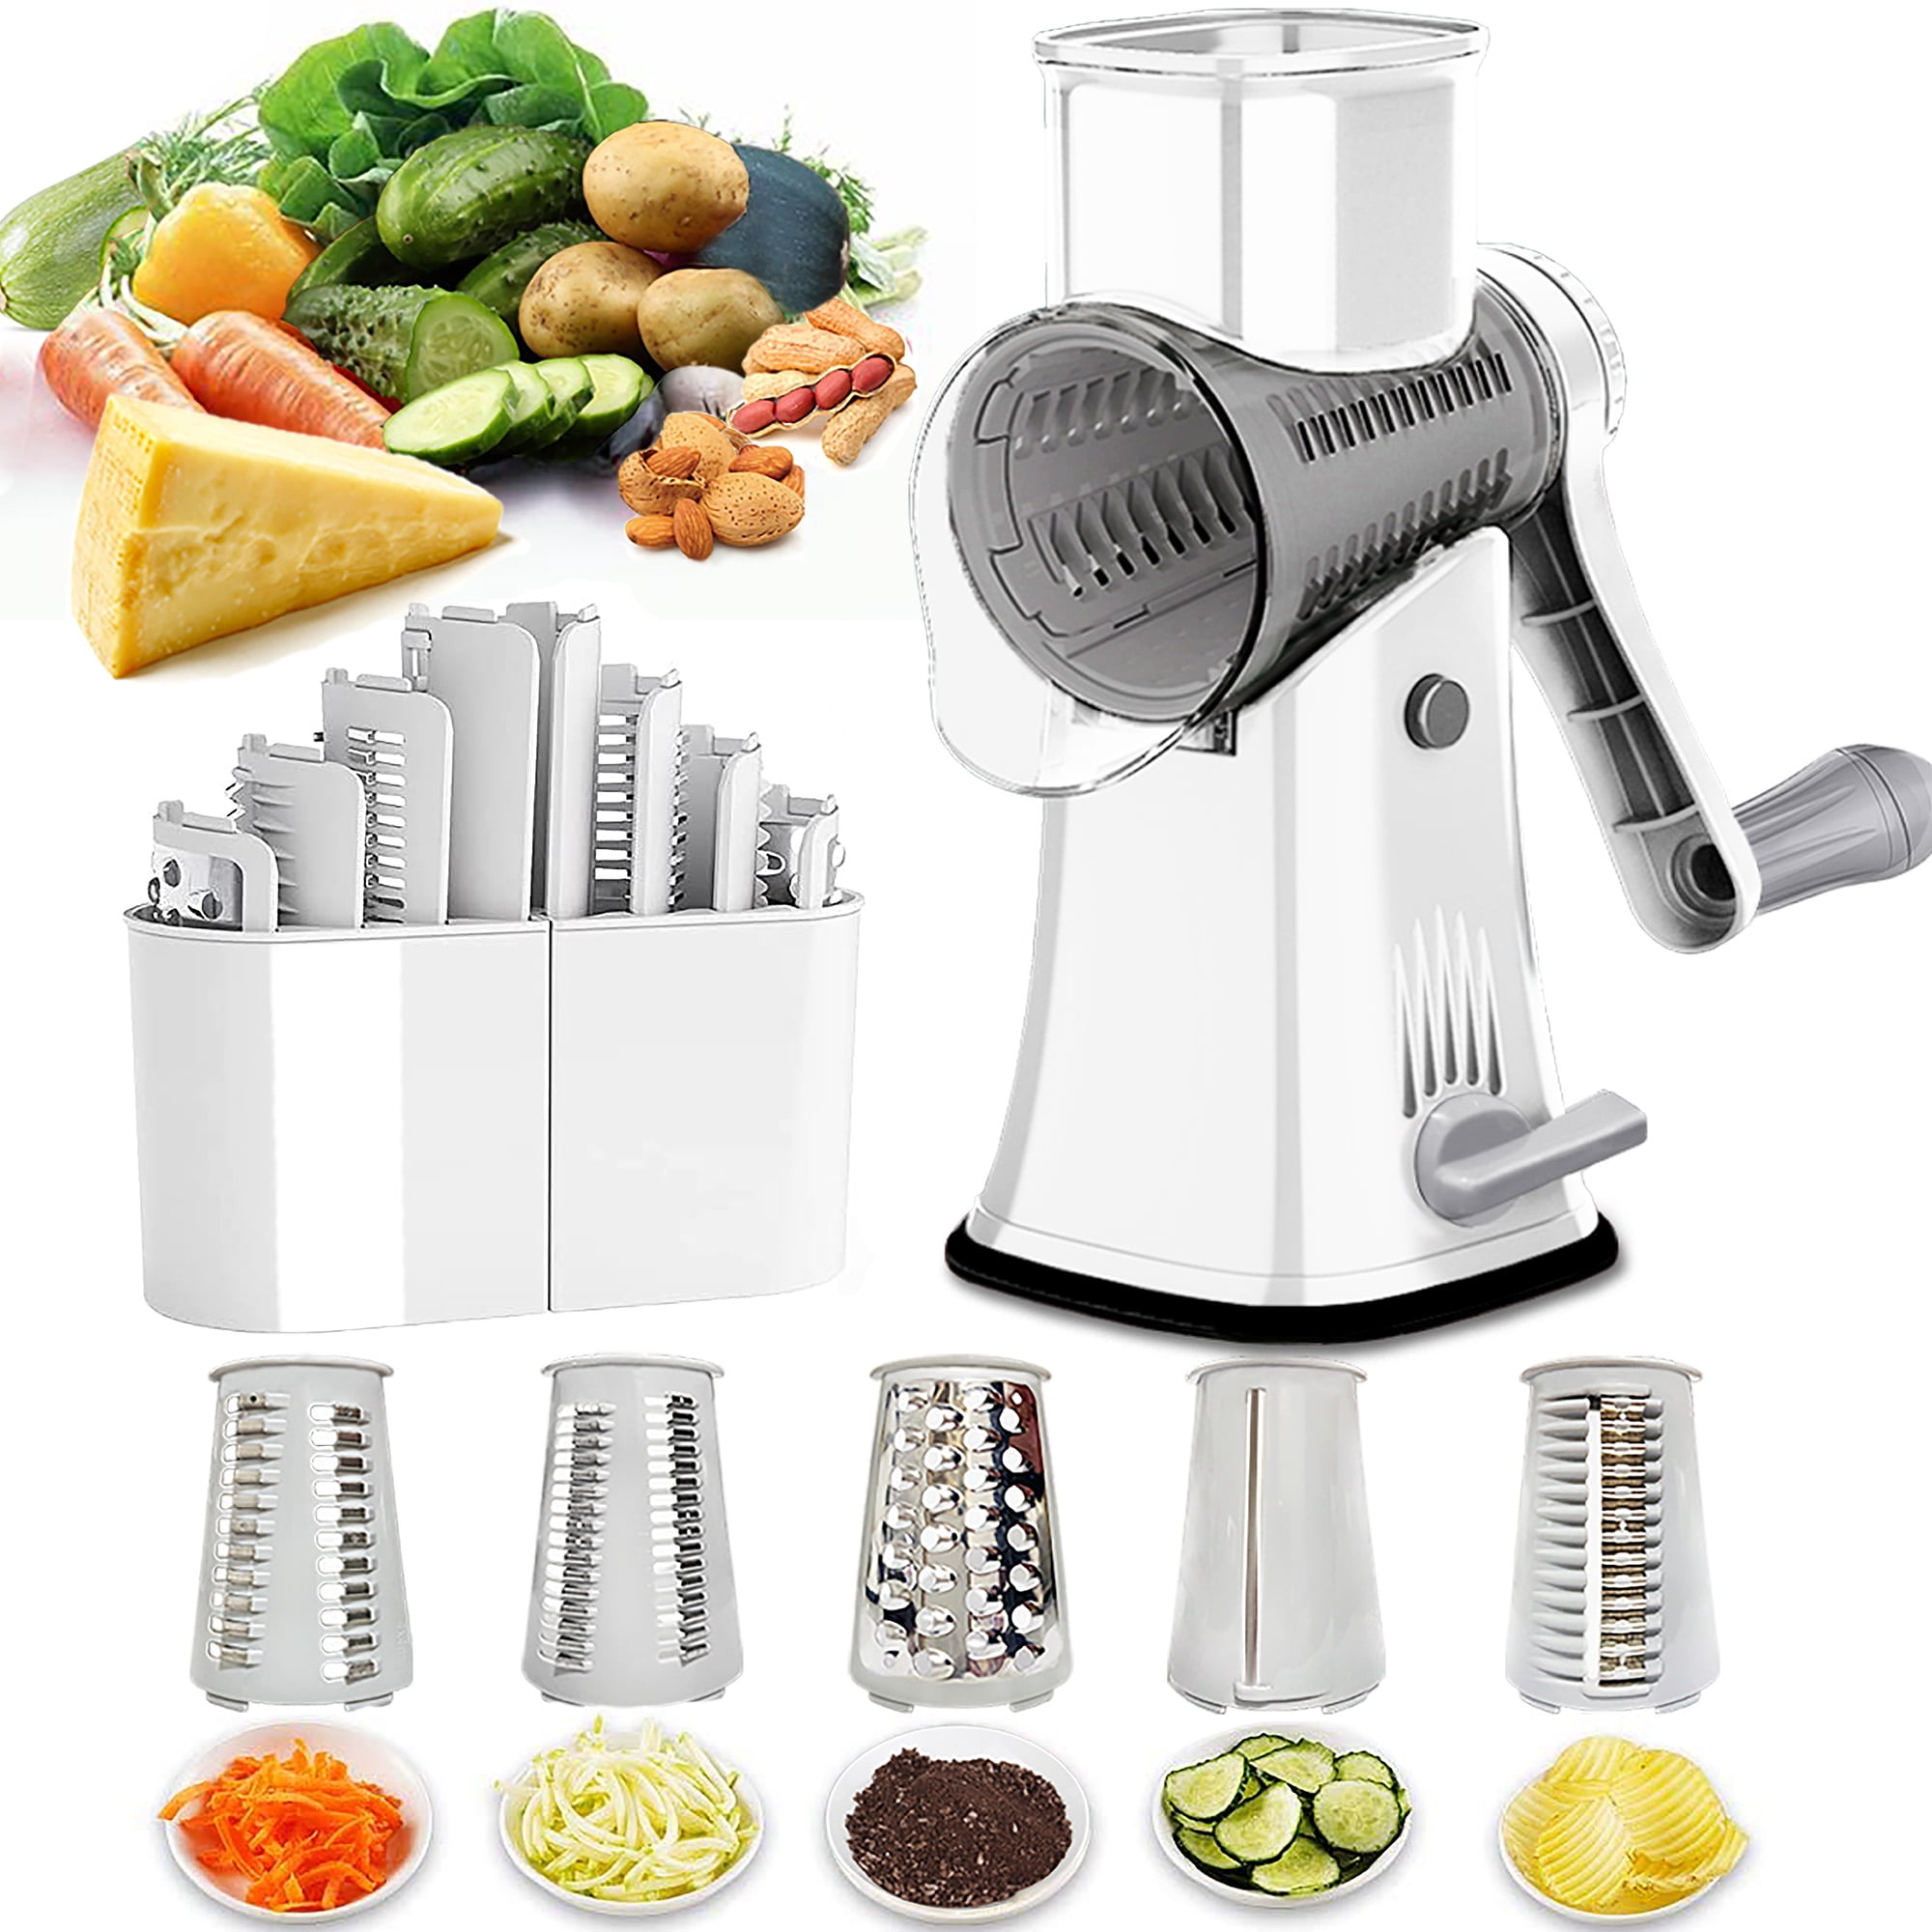  EDEFISY Rotary Cheese Grater-3-in-1Stainless Steel Manual Drum  Slicer,Rotary Graters for Kitchen,Food Shredder for Vegatables,Nuts and  Chocolate(Blue): Home & Kitchen